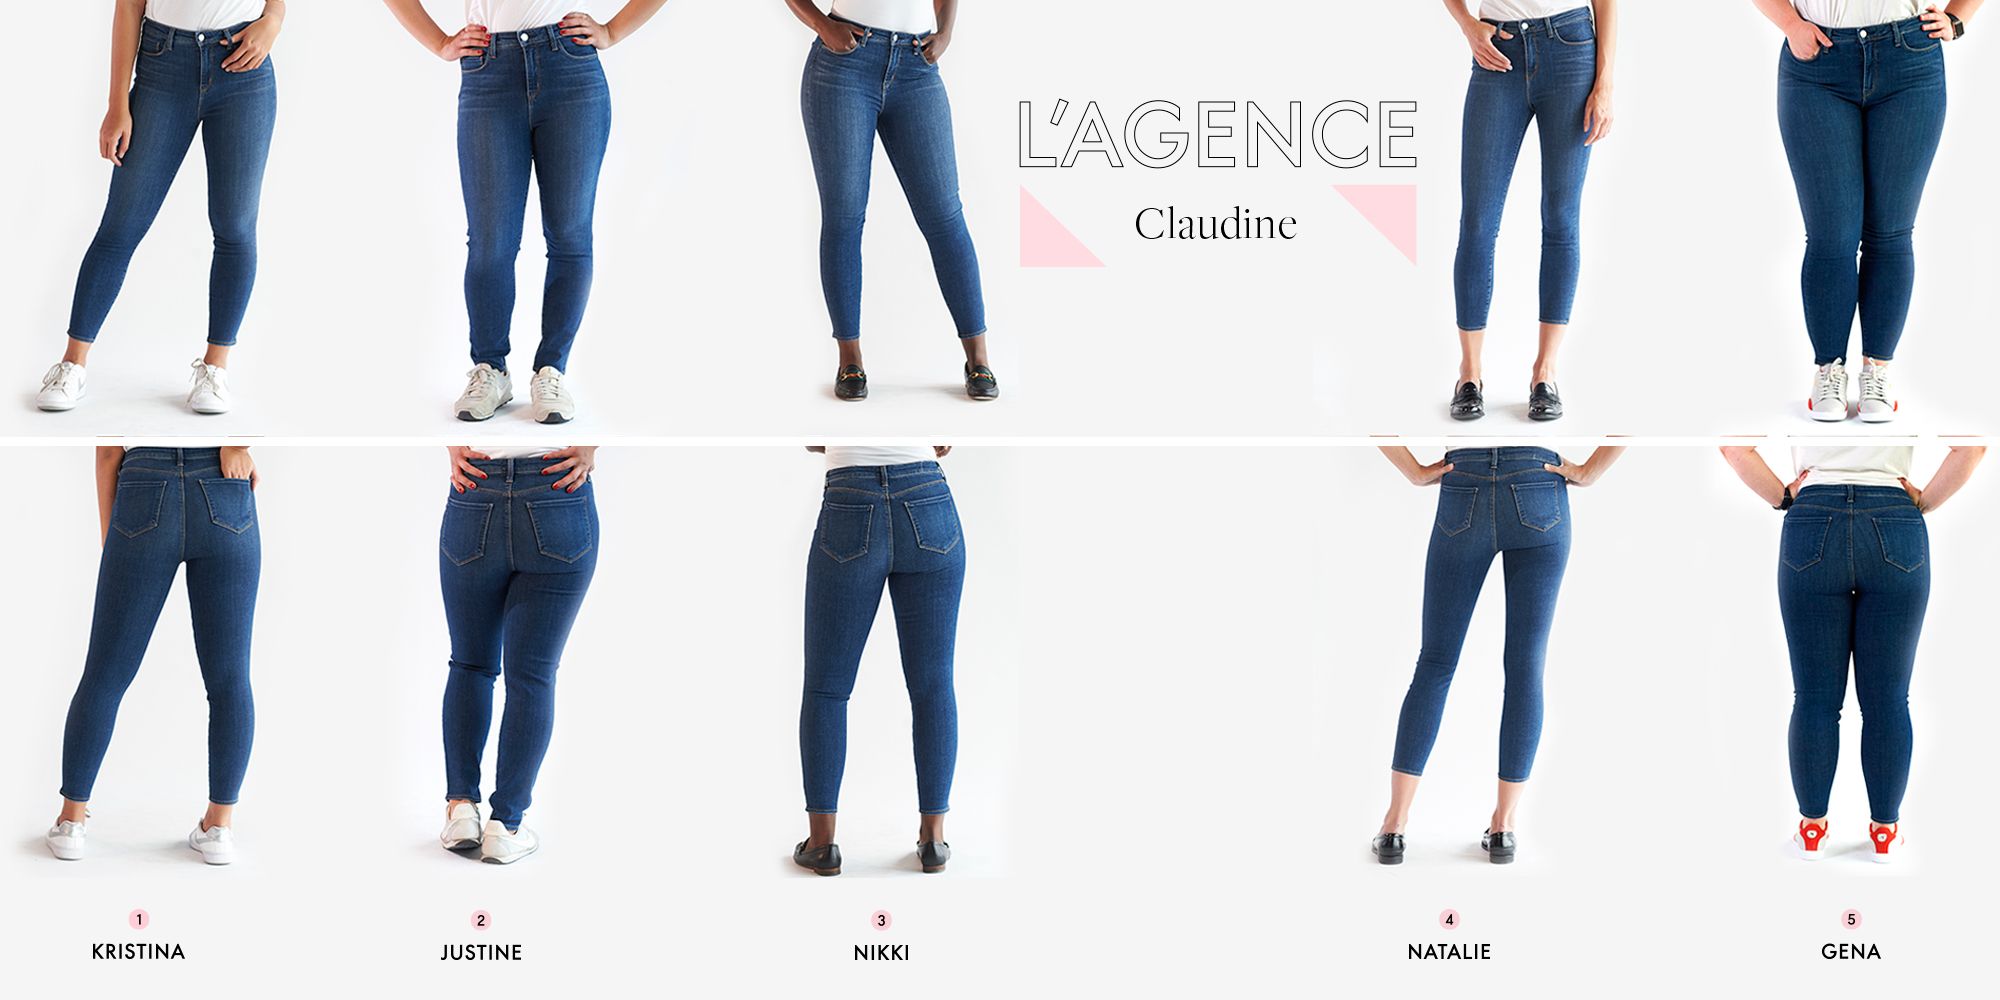 43+ Types Of Jeans: All You Need To Know Before Buying